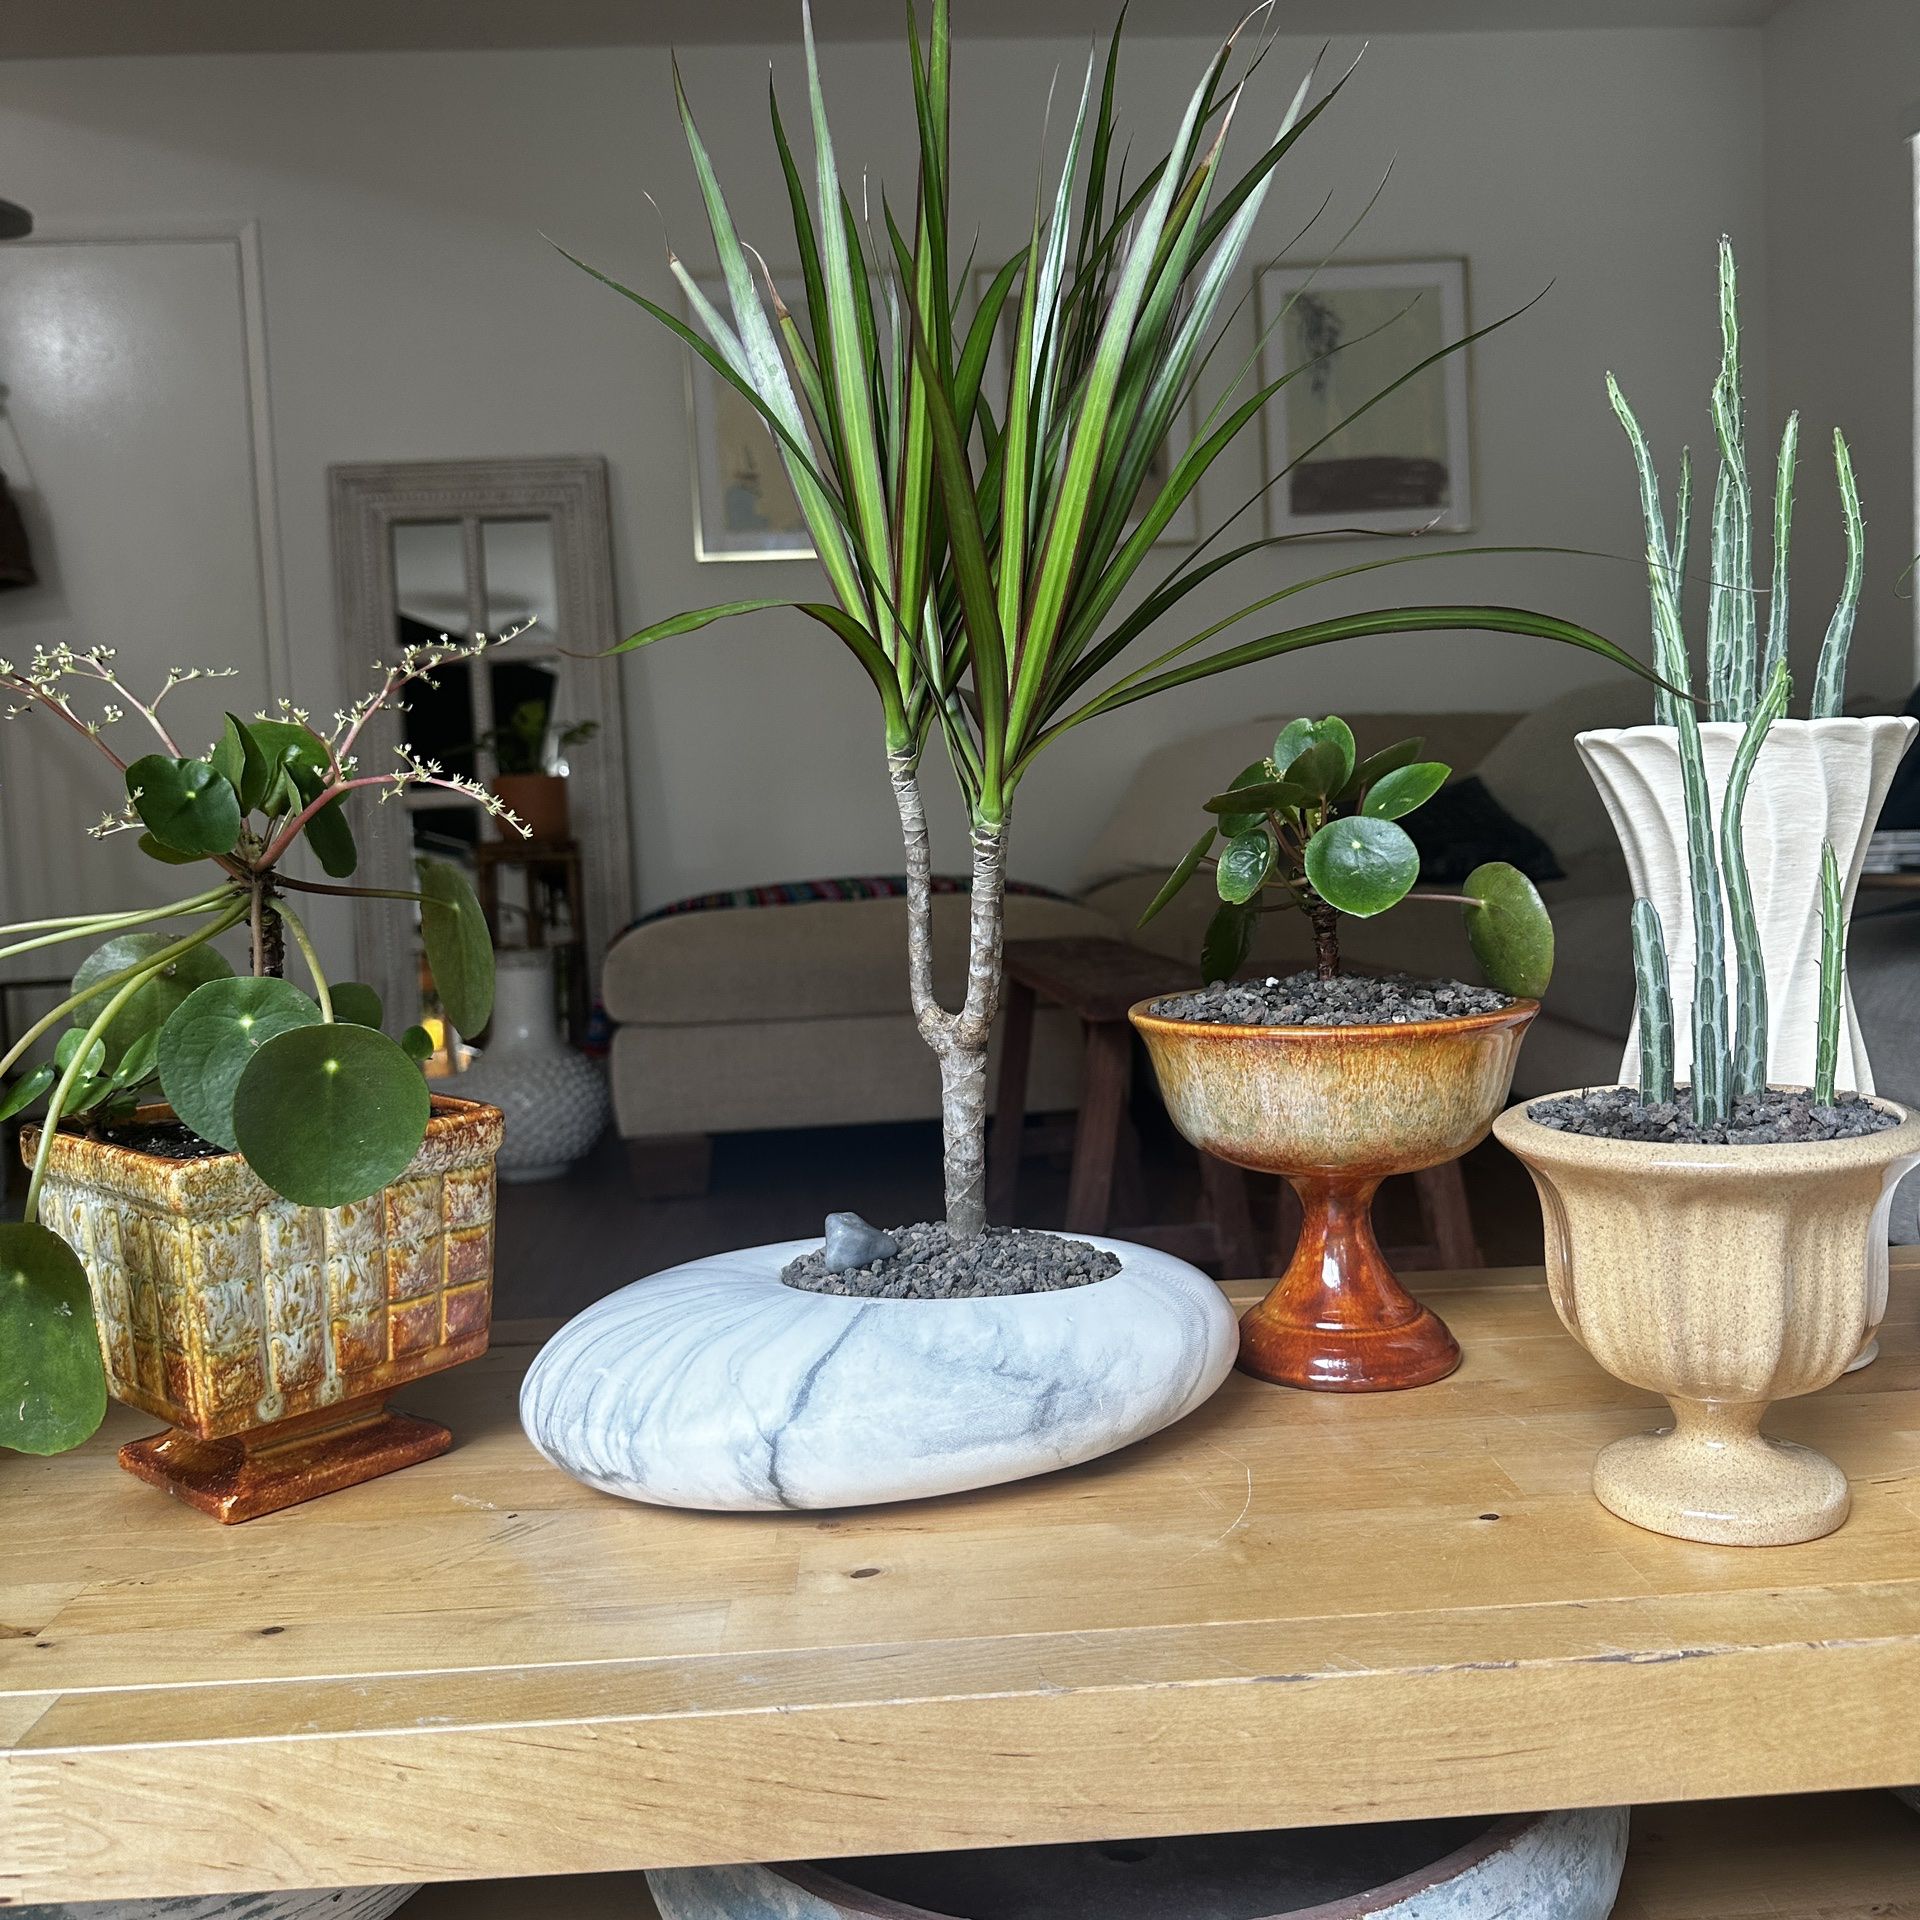 High End Plant Designs In Pots - Houseplants, Trees, Succulents, Cactus (Prices Vary!)